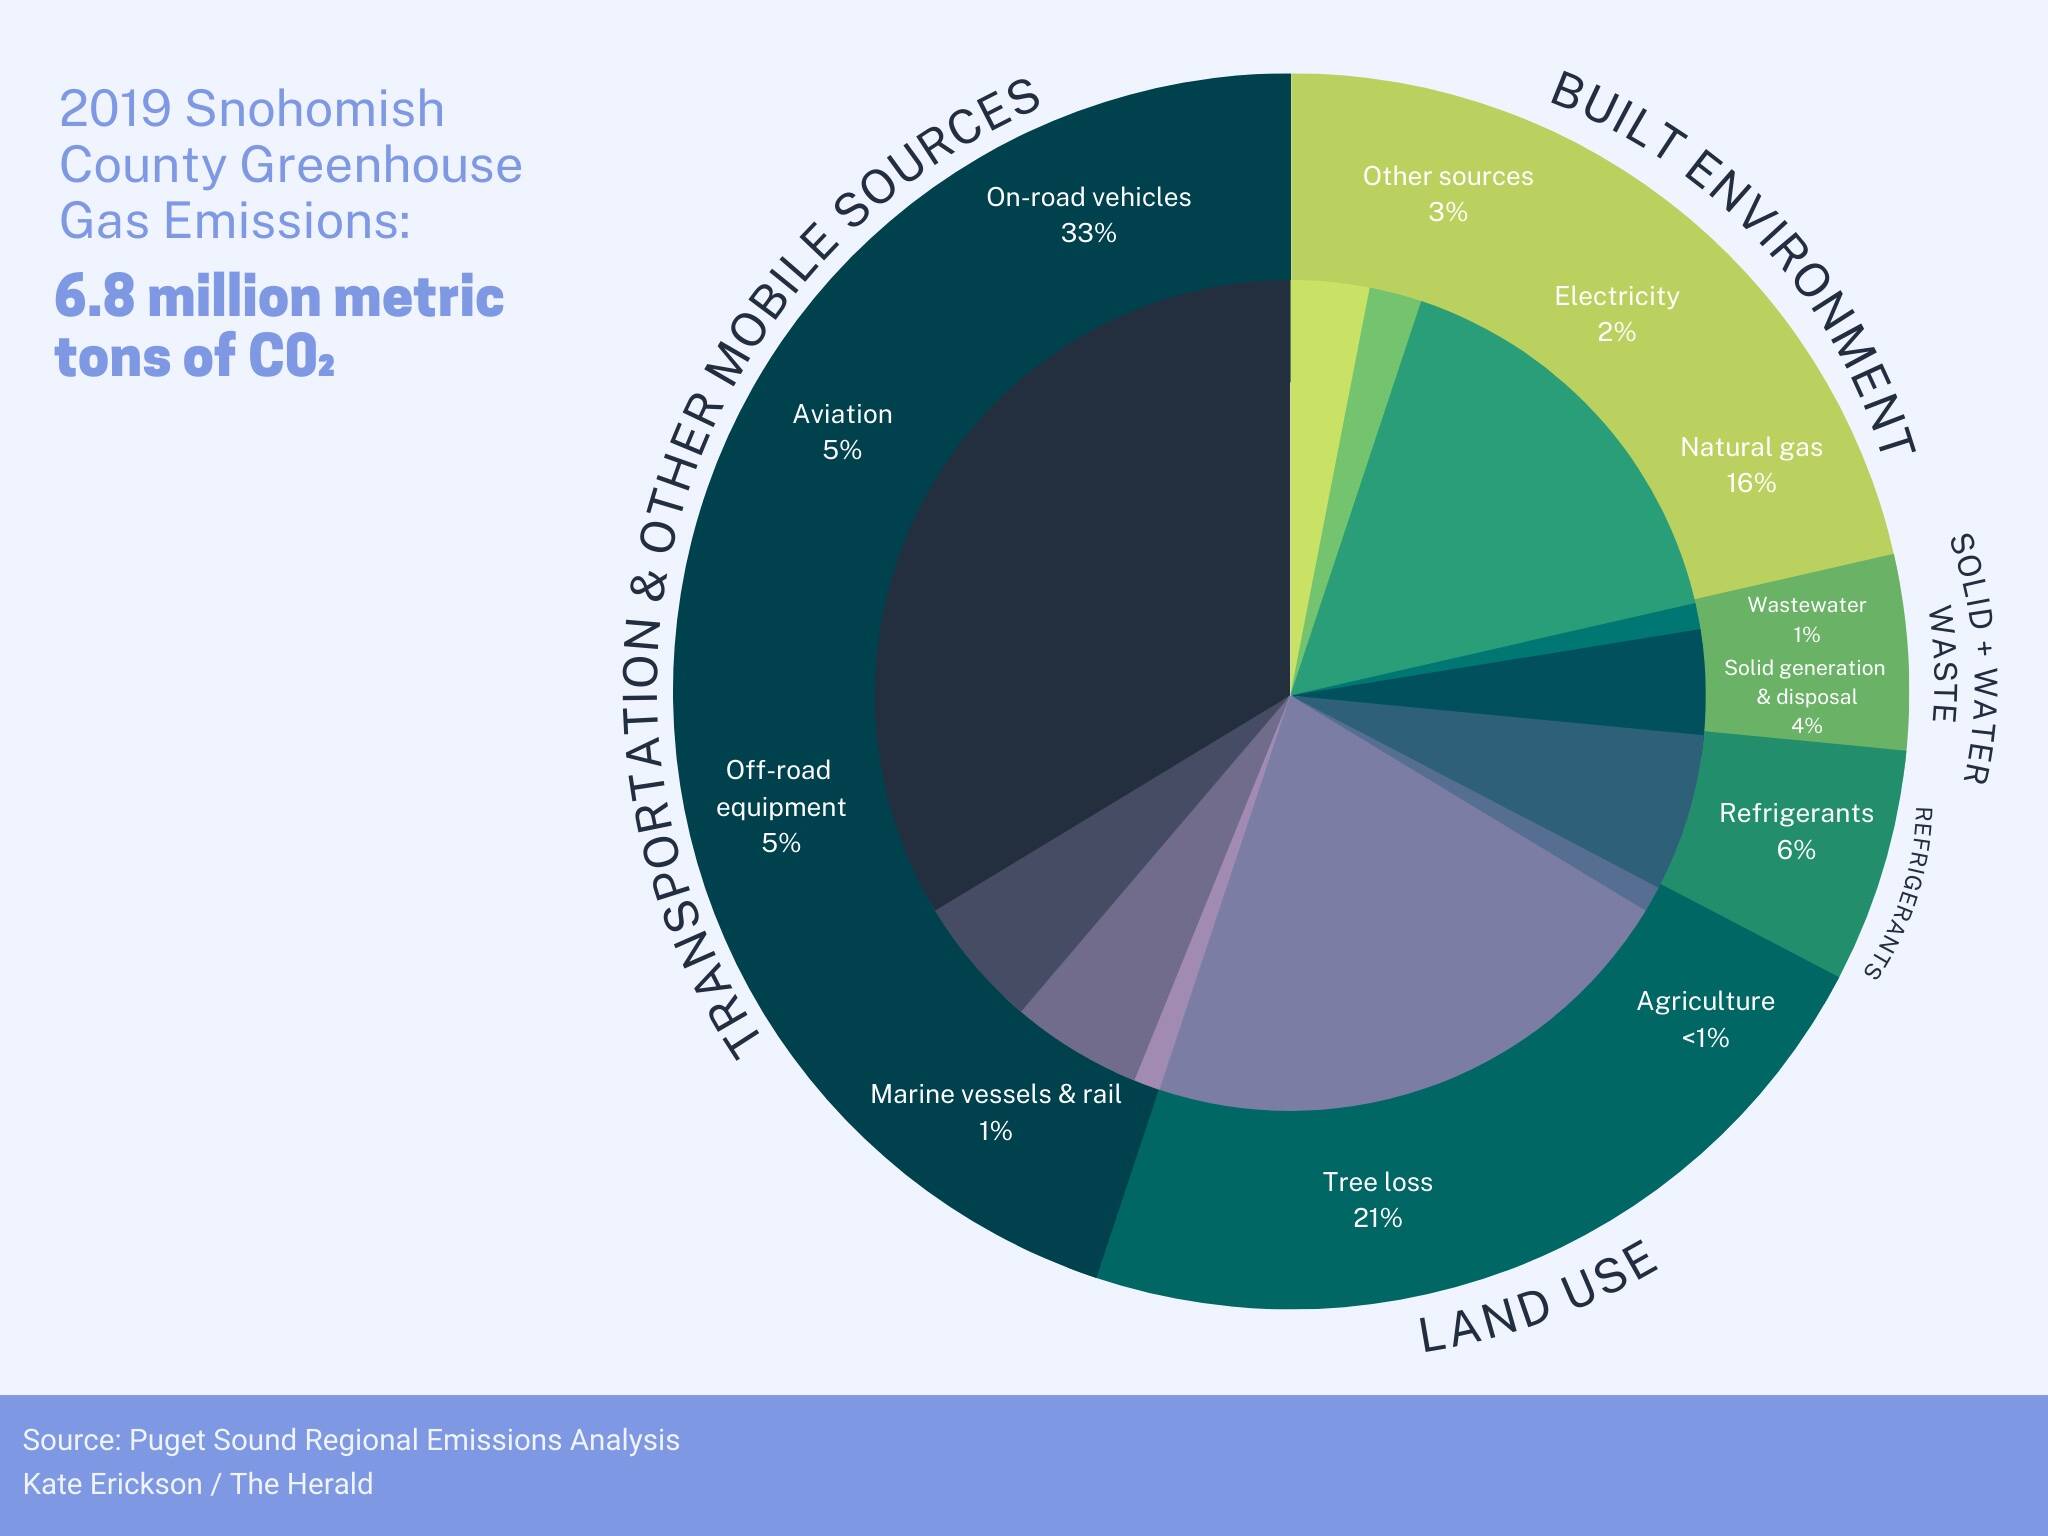 no caption needed. Pie chart breaking down SnoCo's C02 emissions in 2019. Source: Puget Sound Regional Emissions Analysis (Kate Erickson / The Herald)